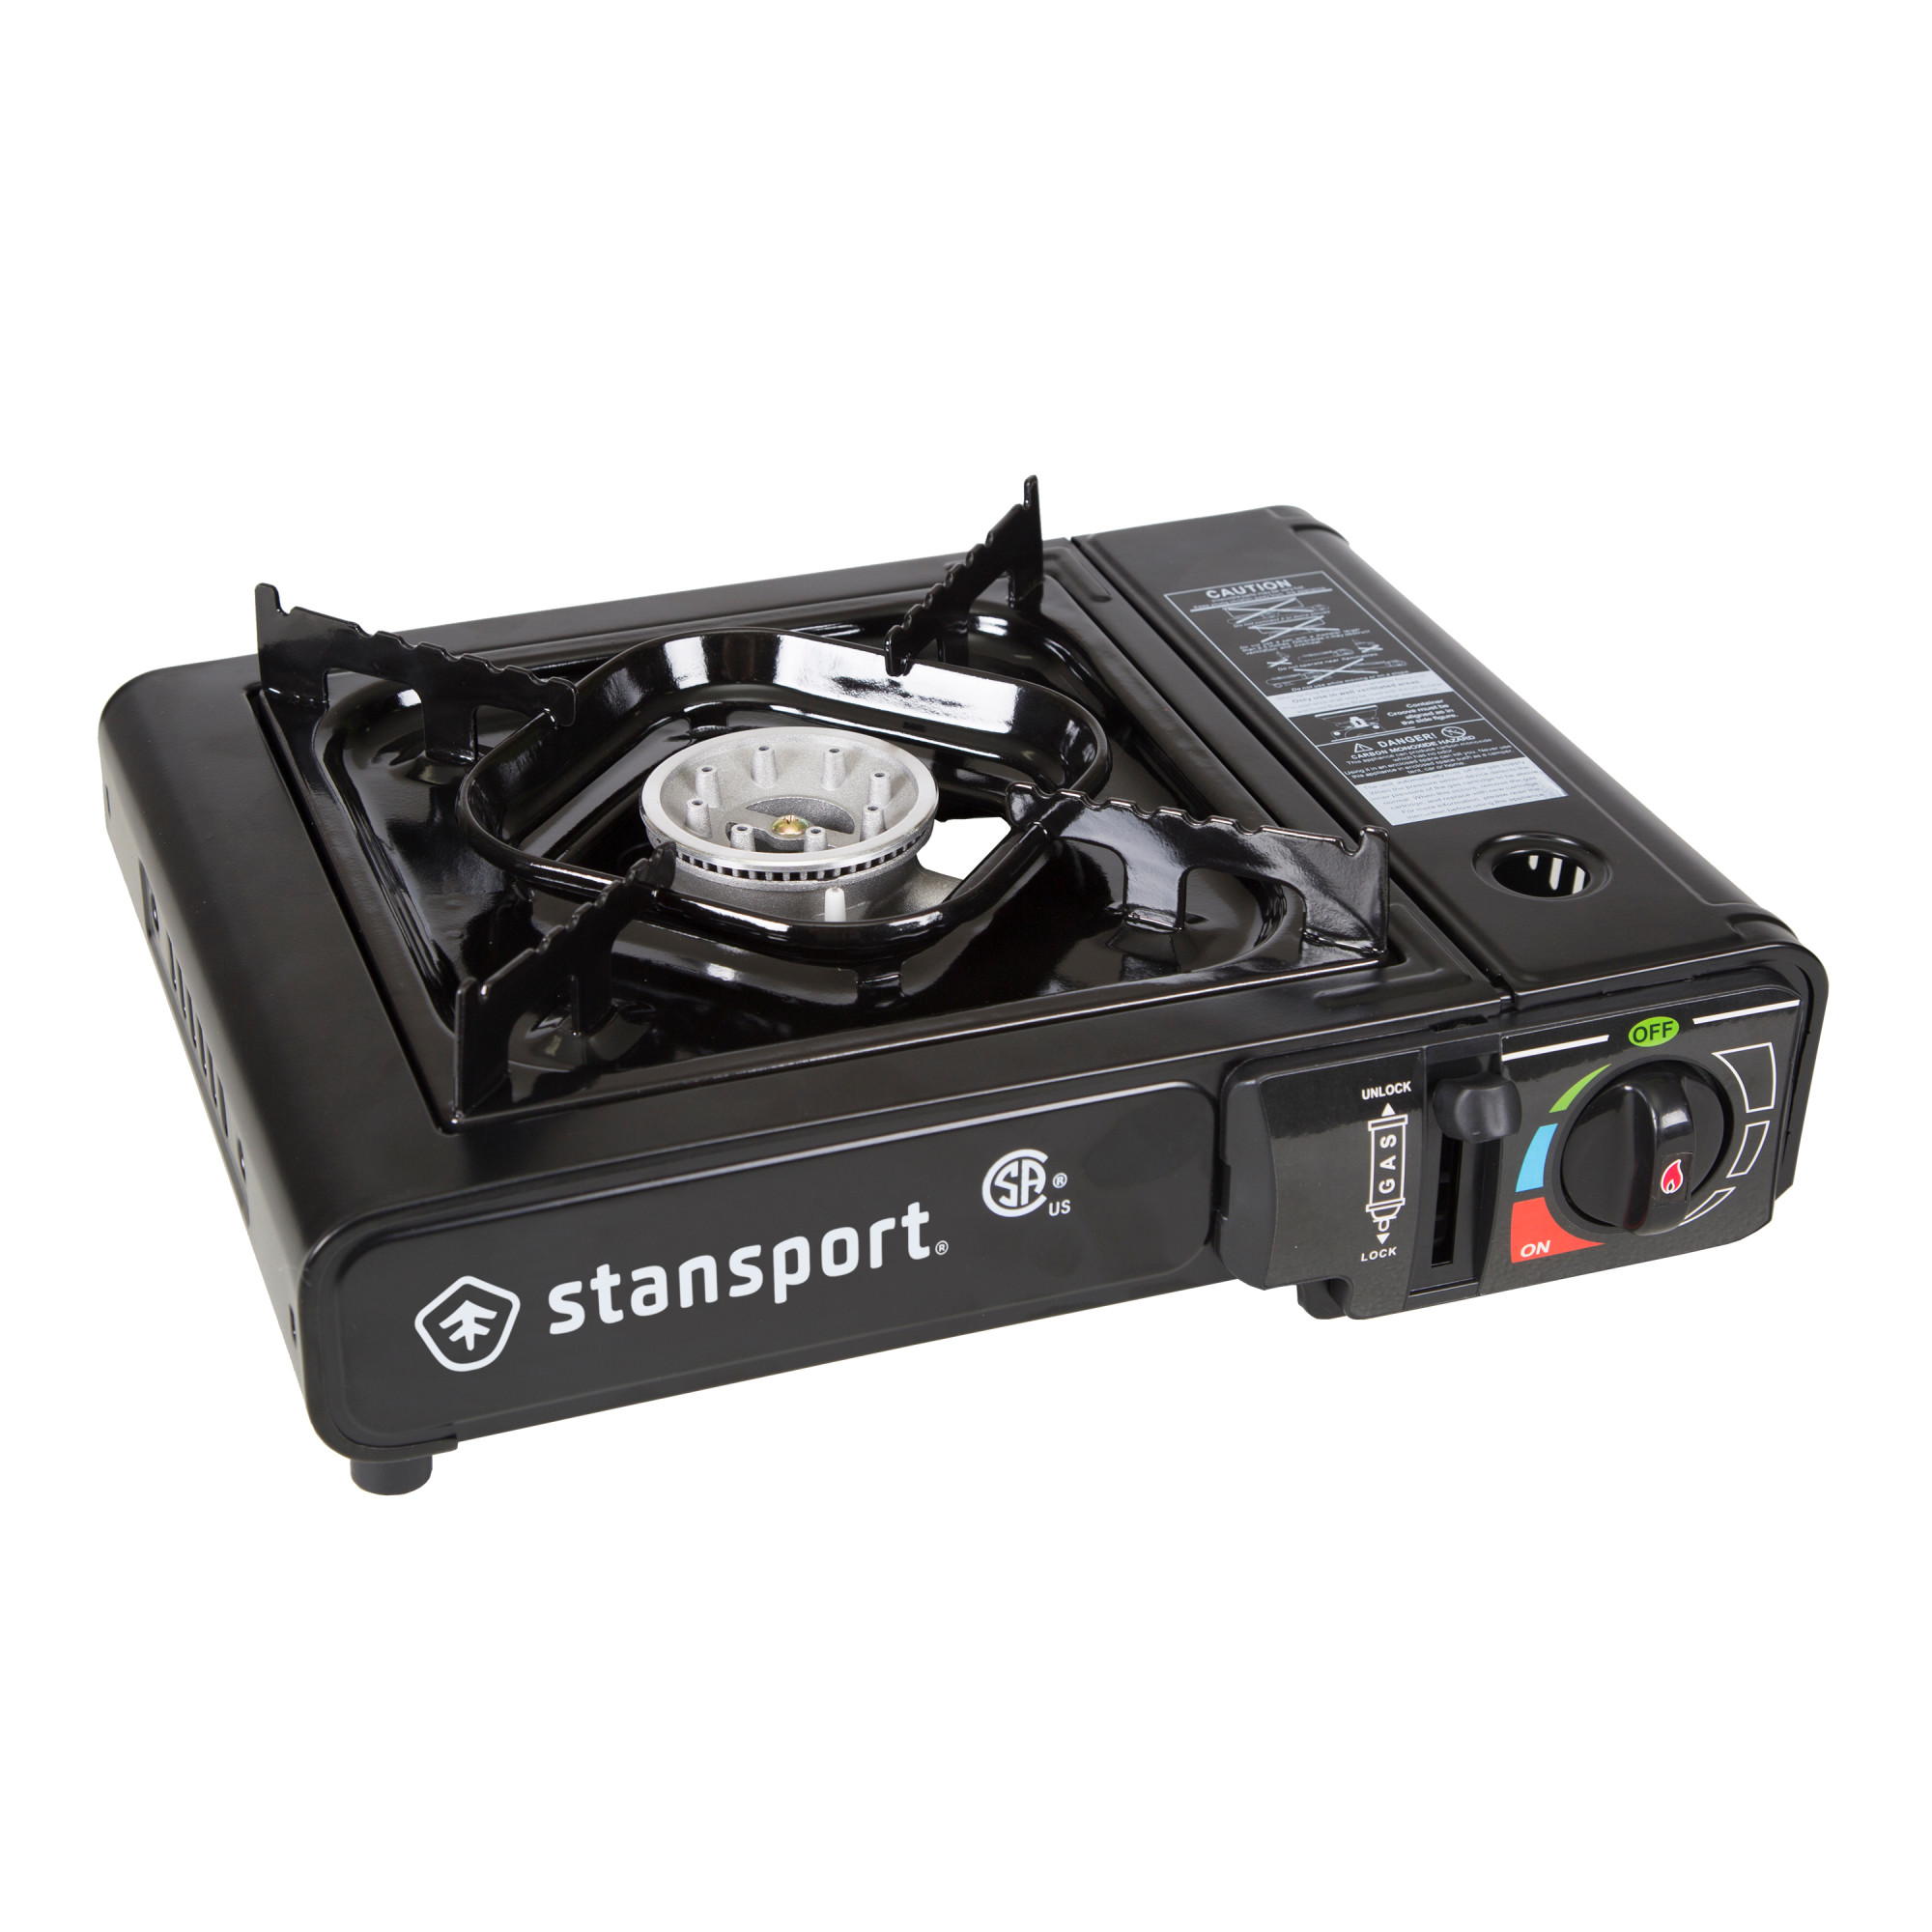 Stansport Portable Outdoor Butane Stove Black 186-100 - image 1 of 4